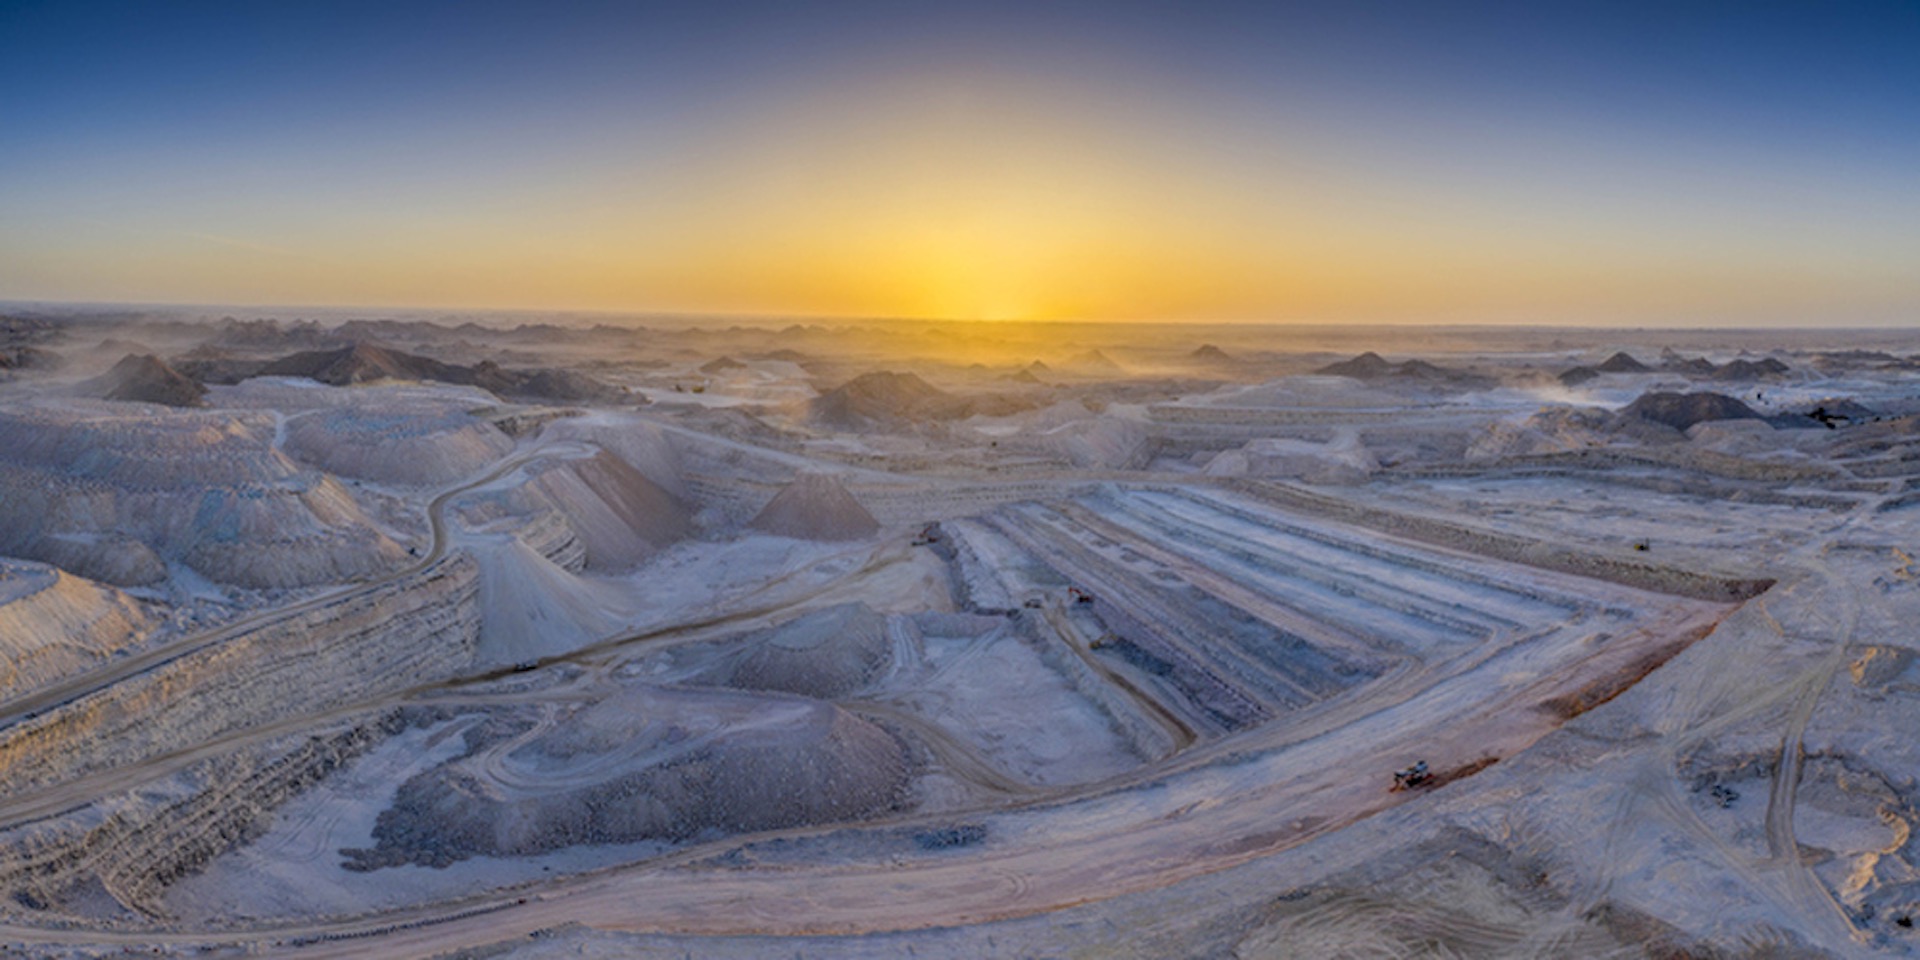 Oman Ministry of Energy and MDO sign 12 mining concession agreements